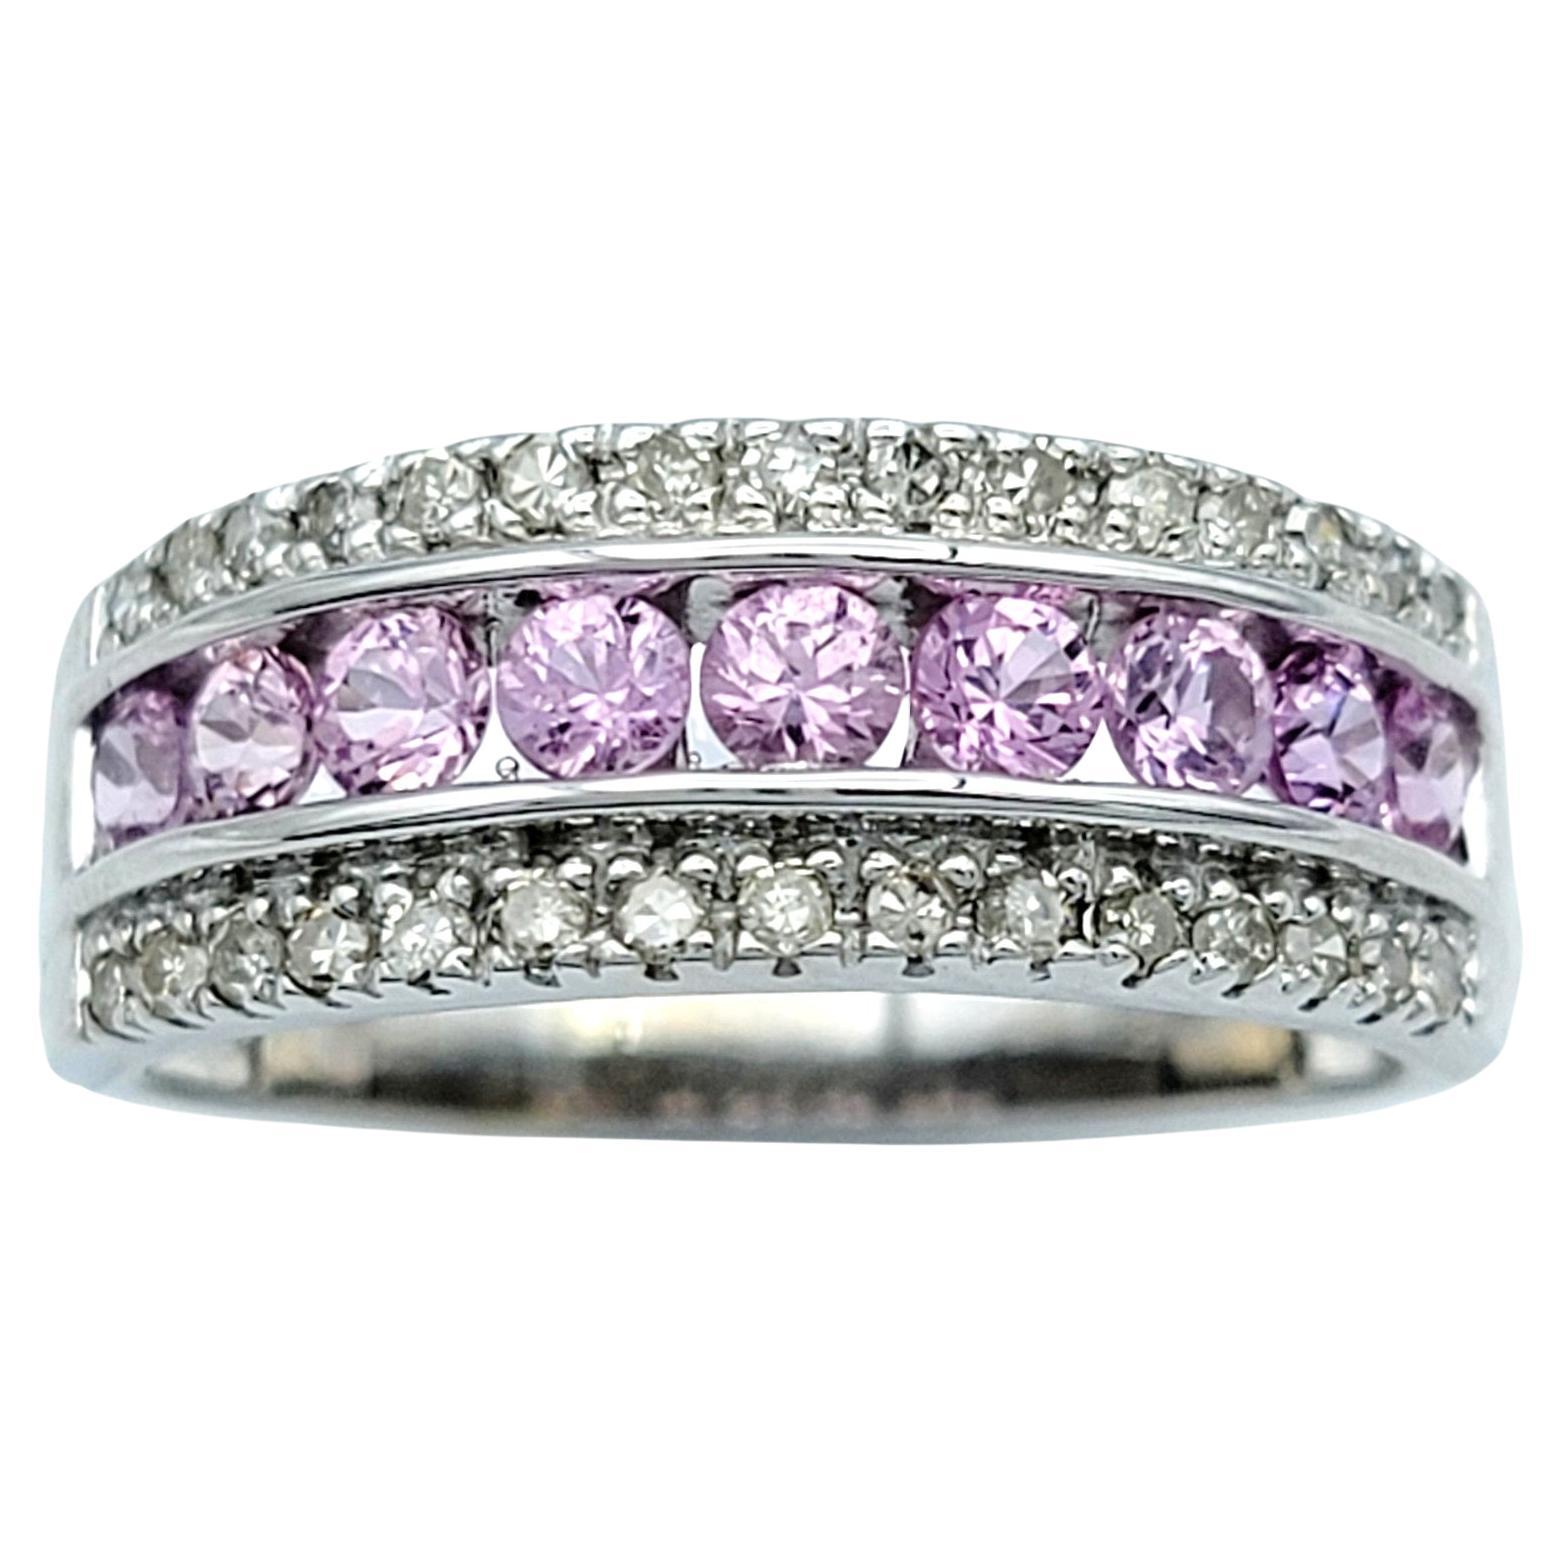 Channel-Set Pink Sapphire and Round Diamond Band Ring Set in 14 Karat White Gold